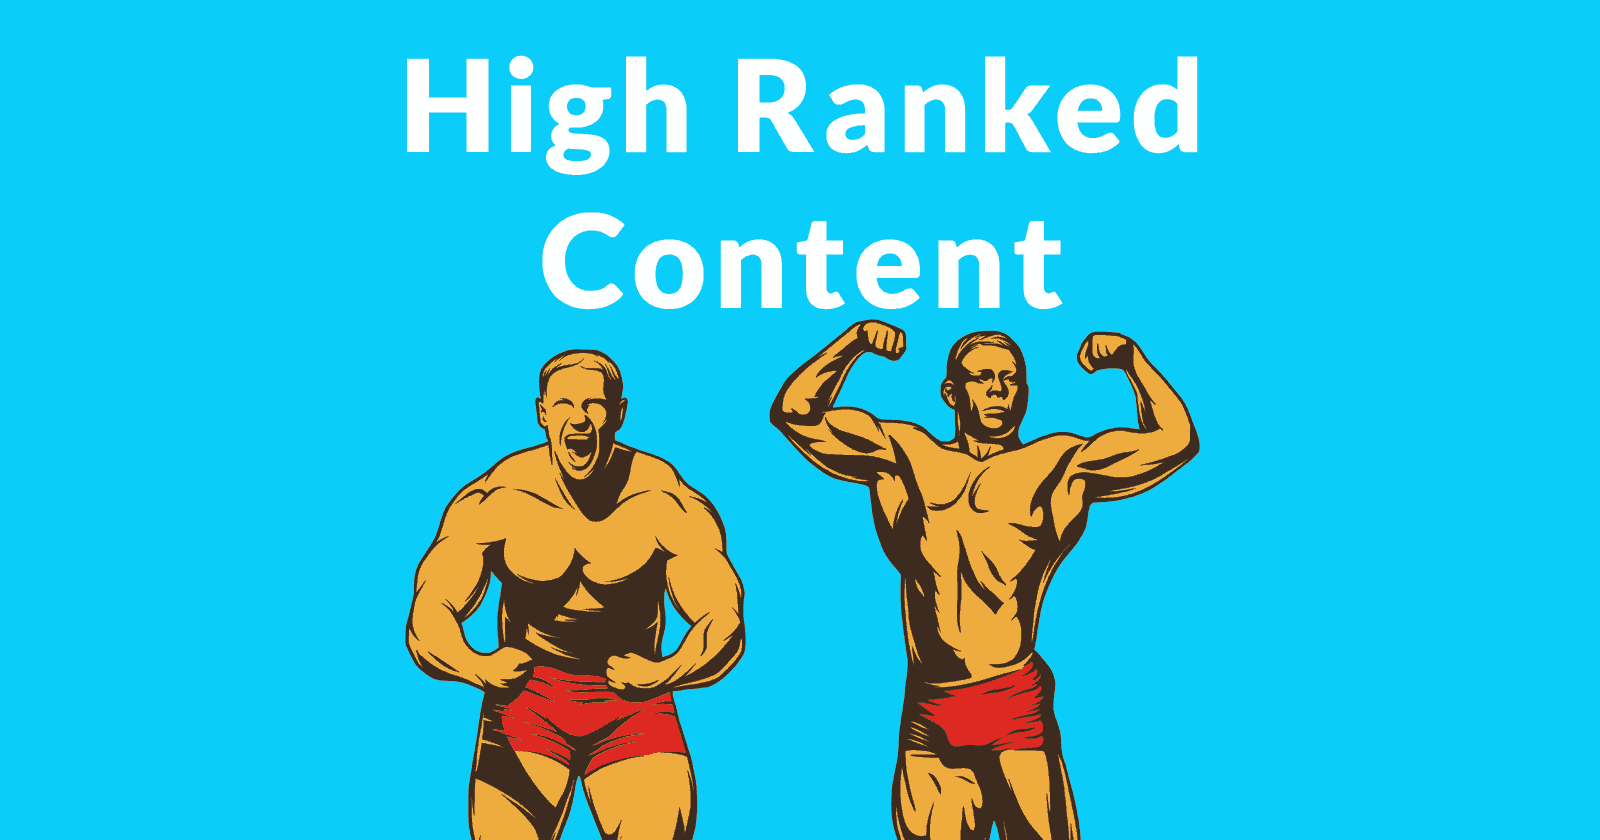 The words High Ranking Content over images of two body builders flexing